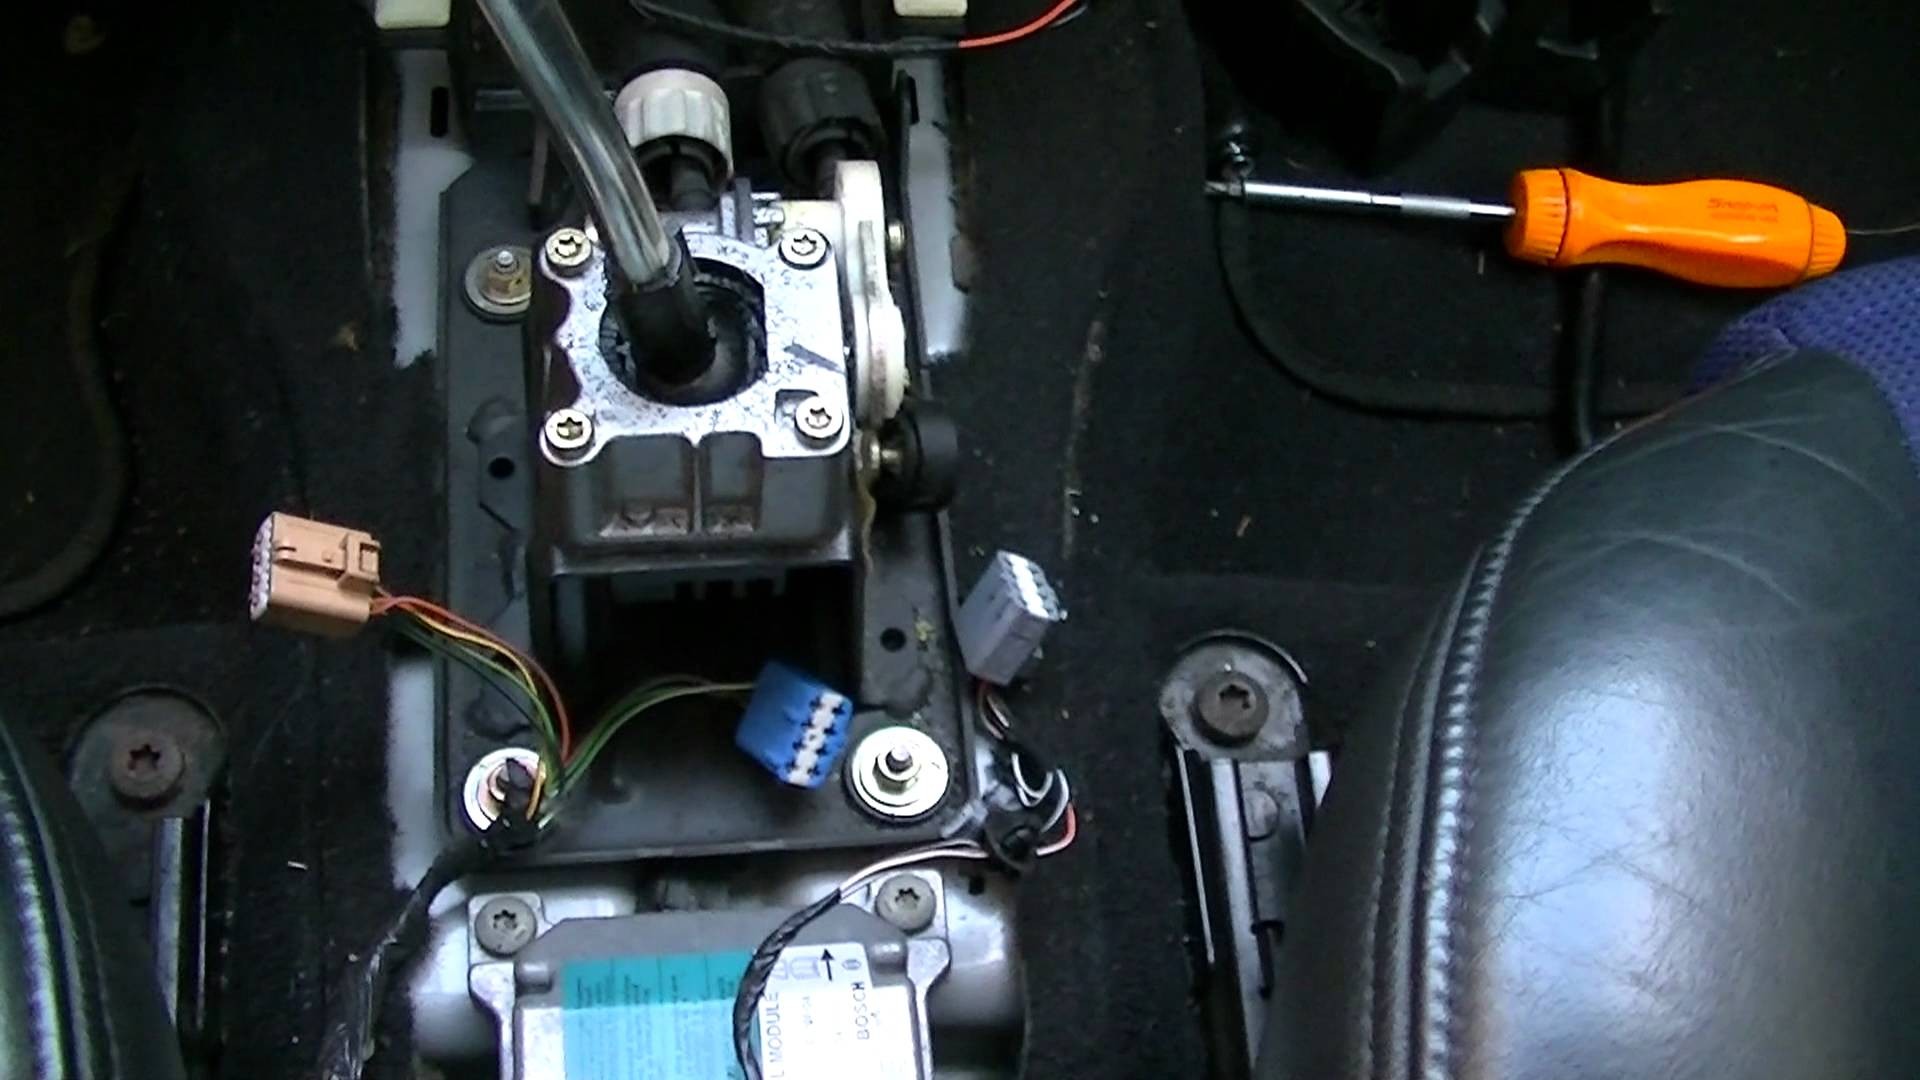 2005 ford Focus Zx4 Engine Diagram Focus Shifter Cables Part 1 Of 2005 ford Focus Zx4 Engine Diagram